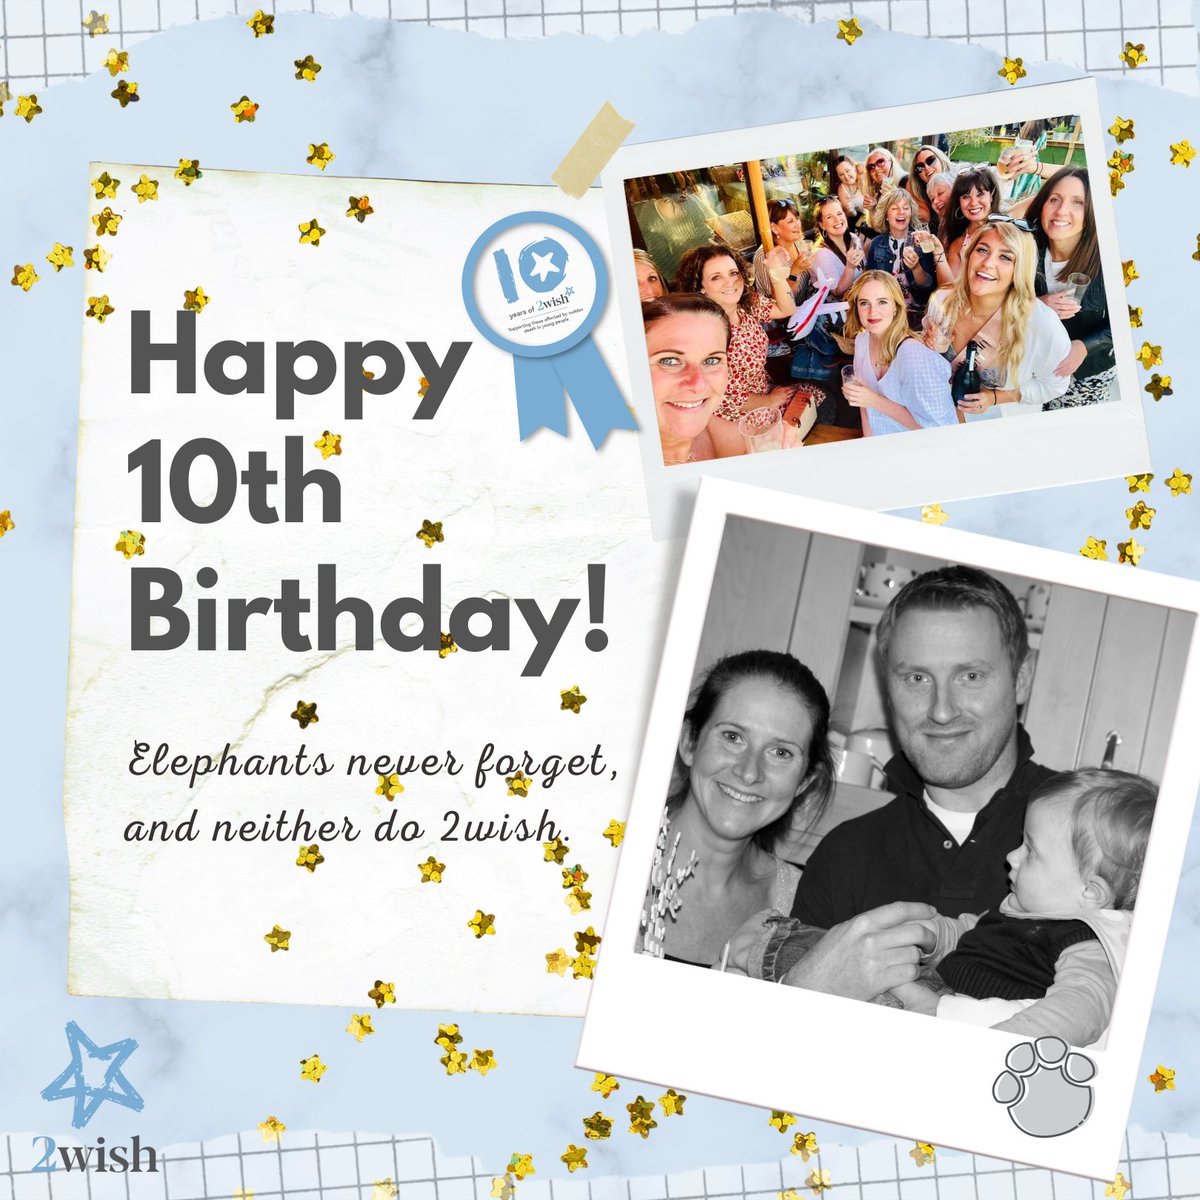 10 years ago today, Rhian Mannings née Burke, founded 2wish after the tragic loss of her beloved Paul and George. All of us at 2wish HQ want to take this opportunity to wish Rhian and the charity a very Happy 10th Birthday. We are inspired by your dedication every single day. 💙